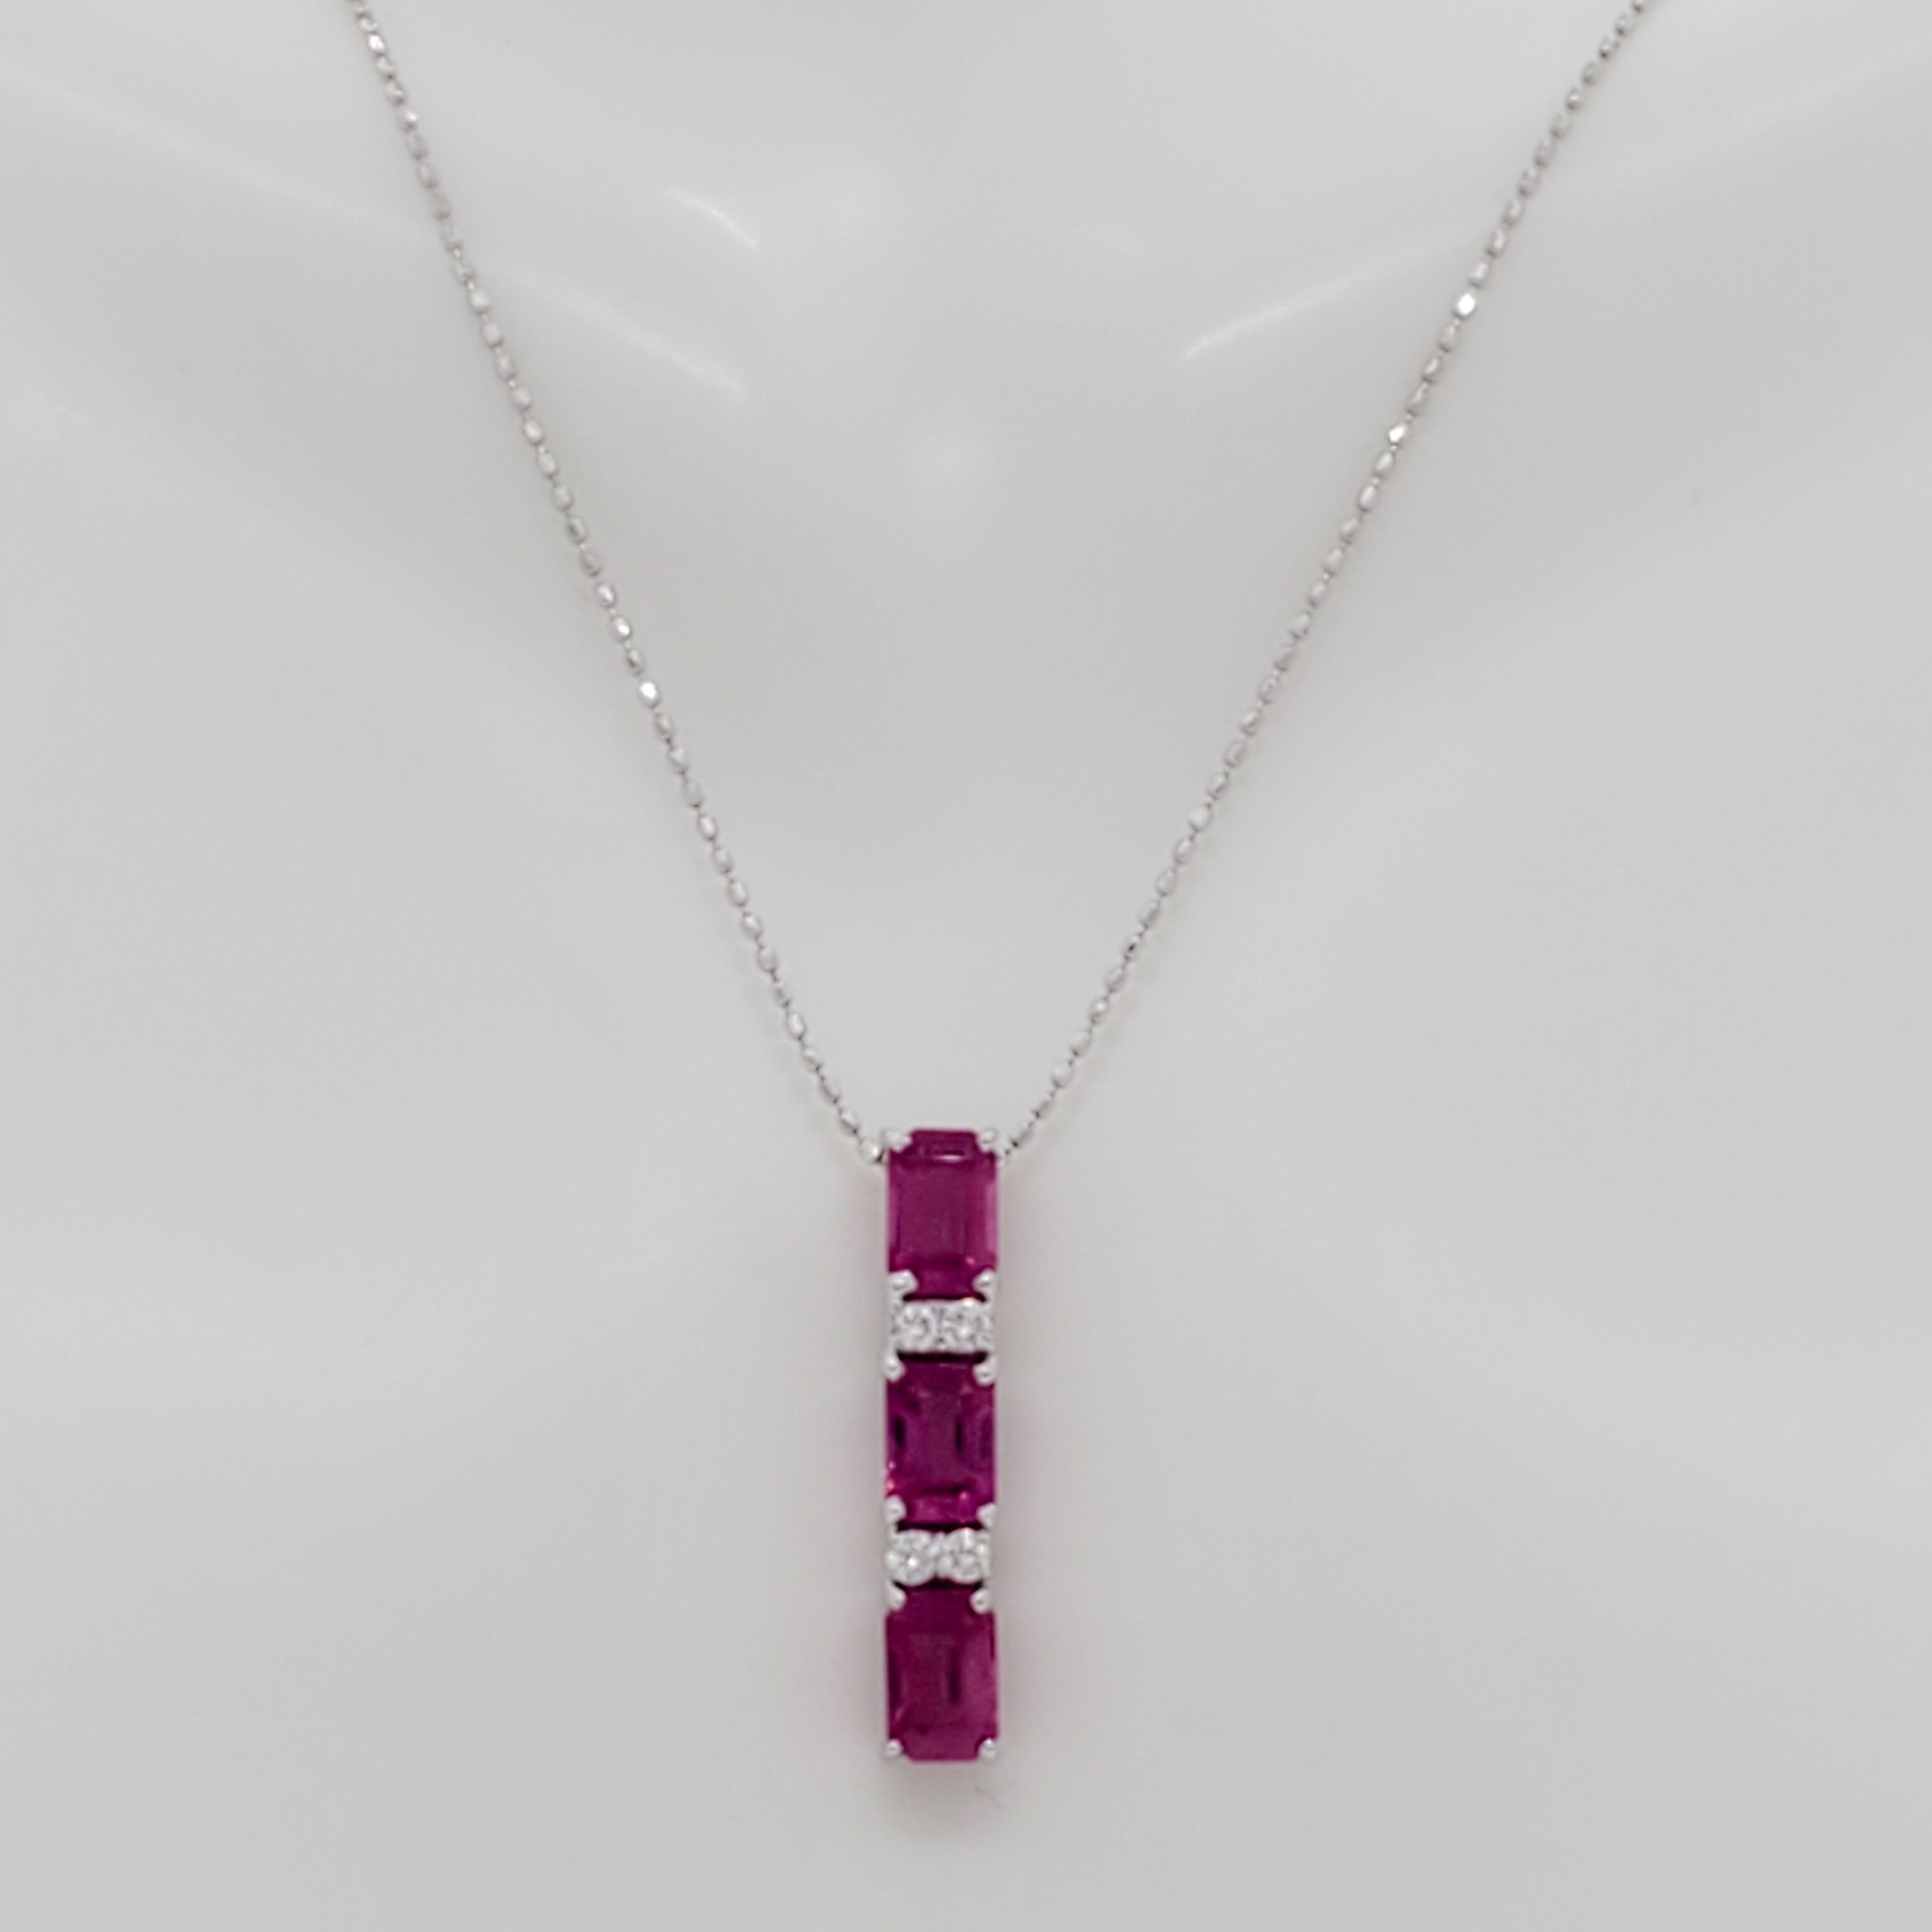 Gorgeous deep red ruby emerald cuts weighing 2.08 ct. with 0.08 ct. good quality, white, and bright diamond rounds.  Handmade in 18k white gold.  Length is 18